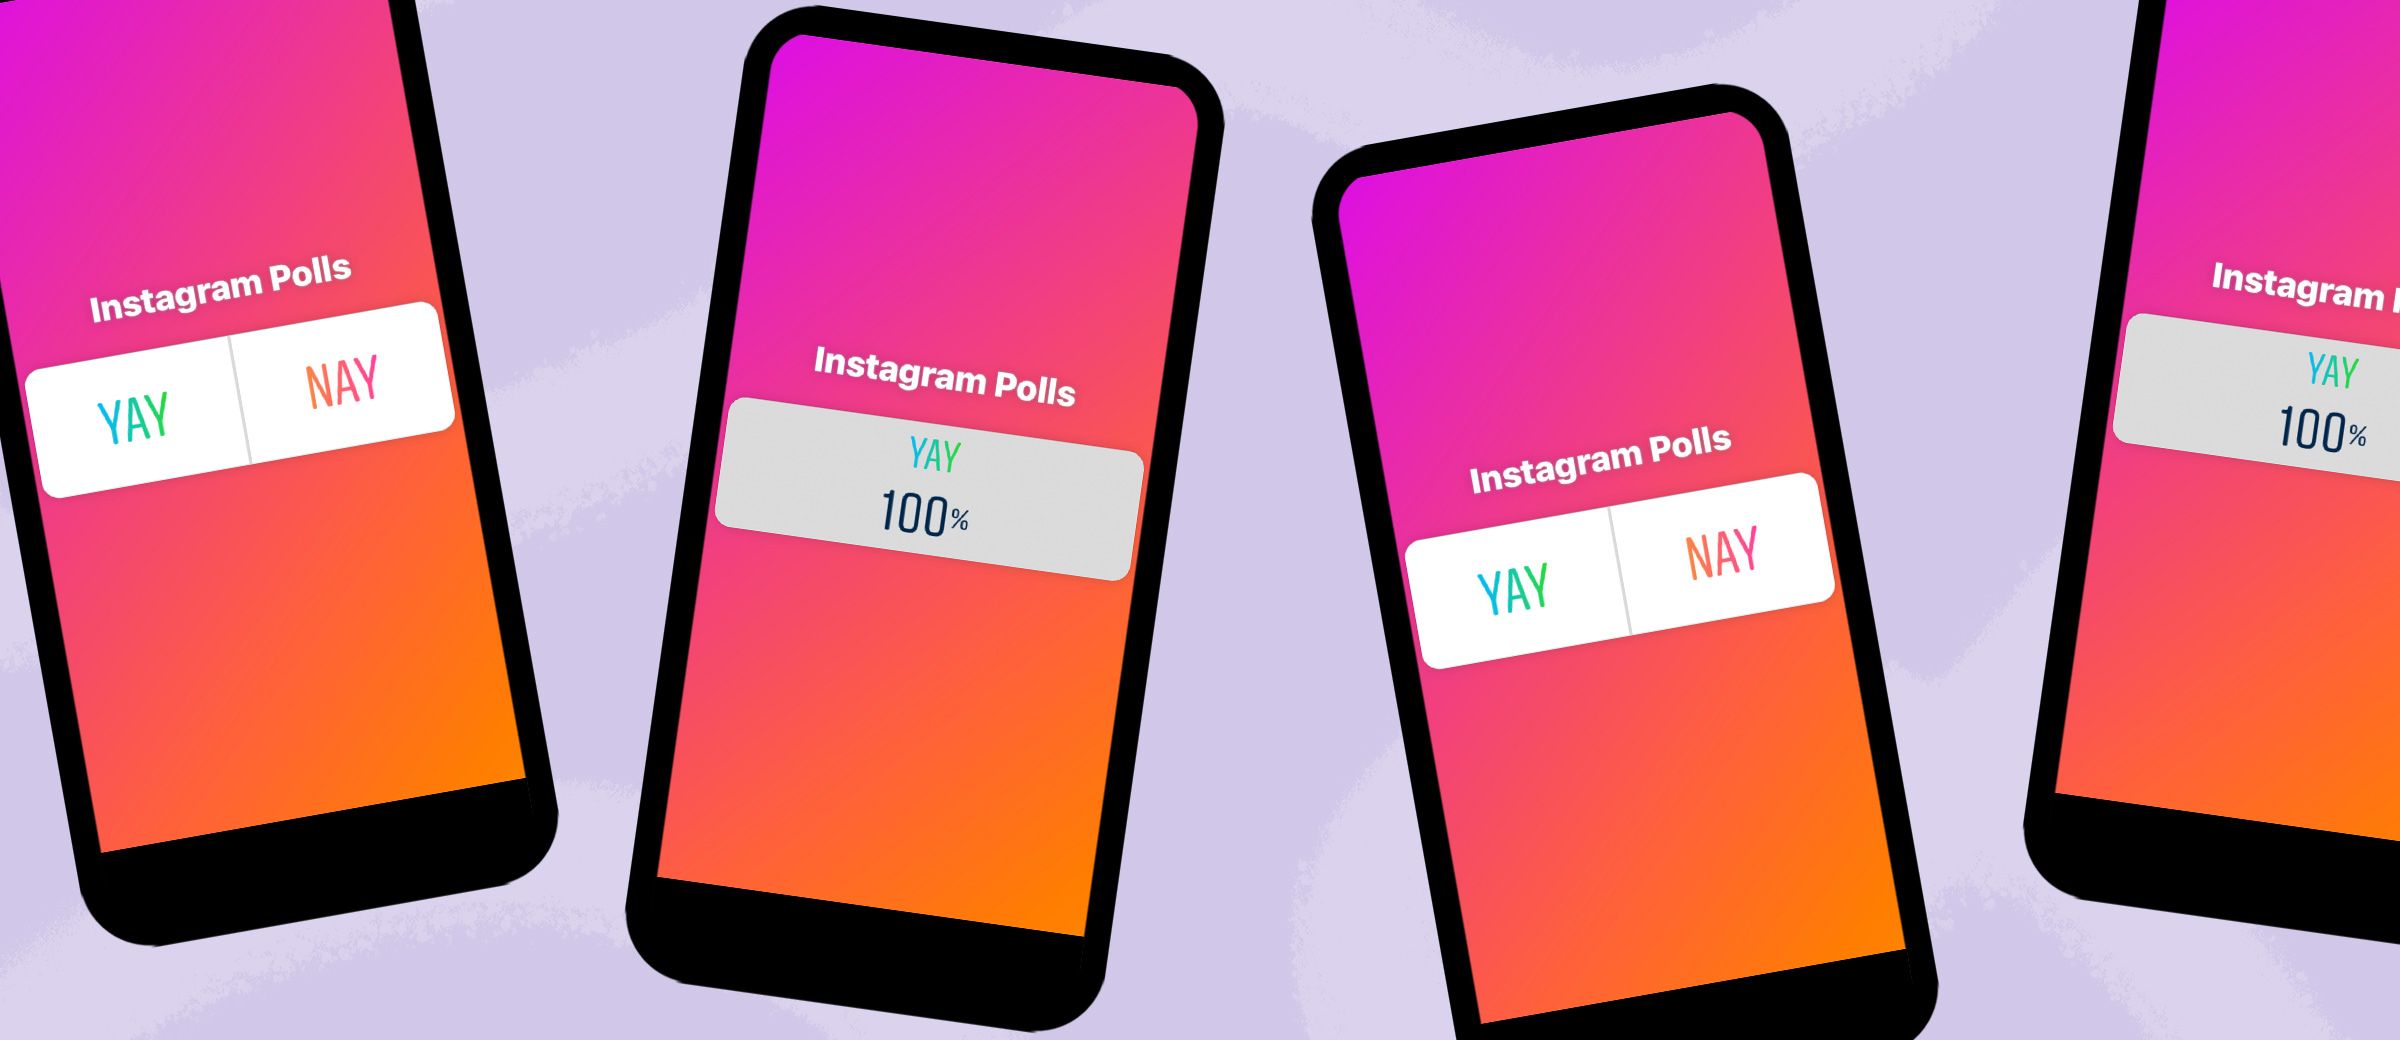 How to Use Instagram Polls to Grow Your Engagement